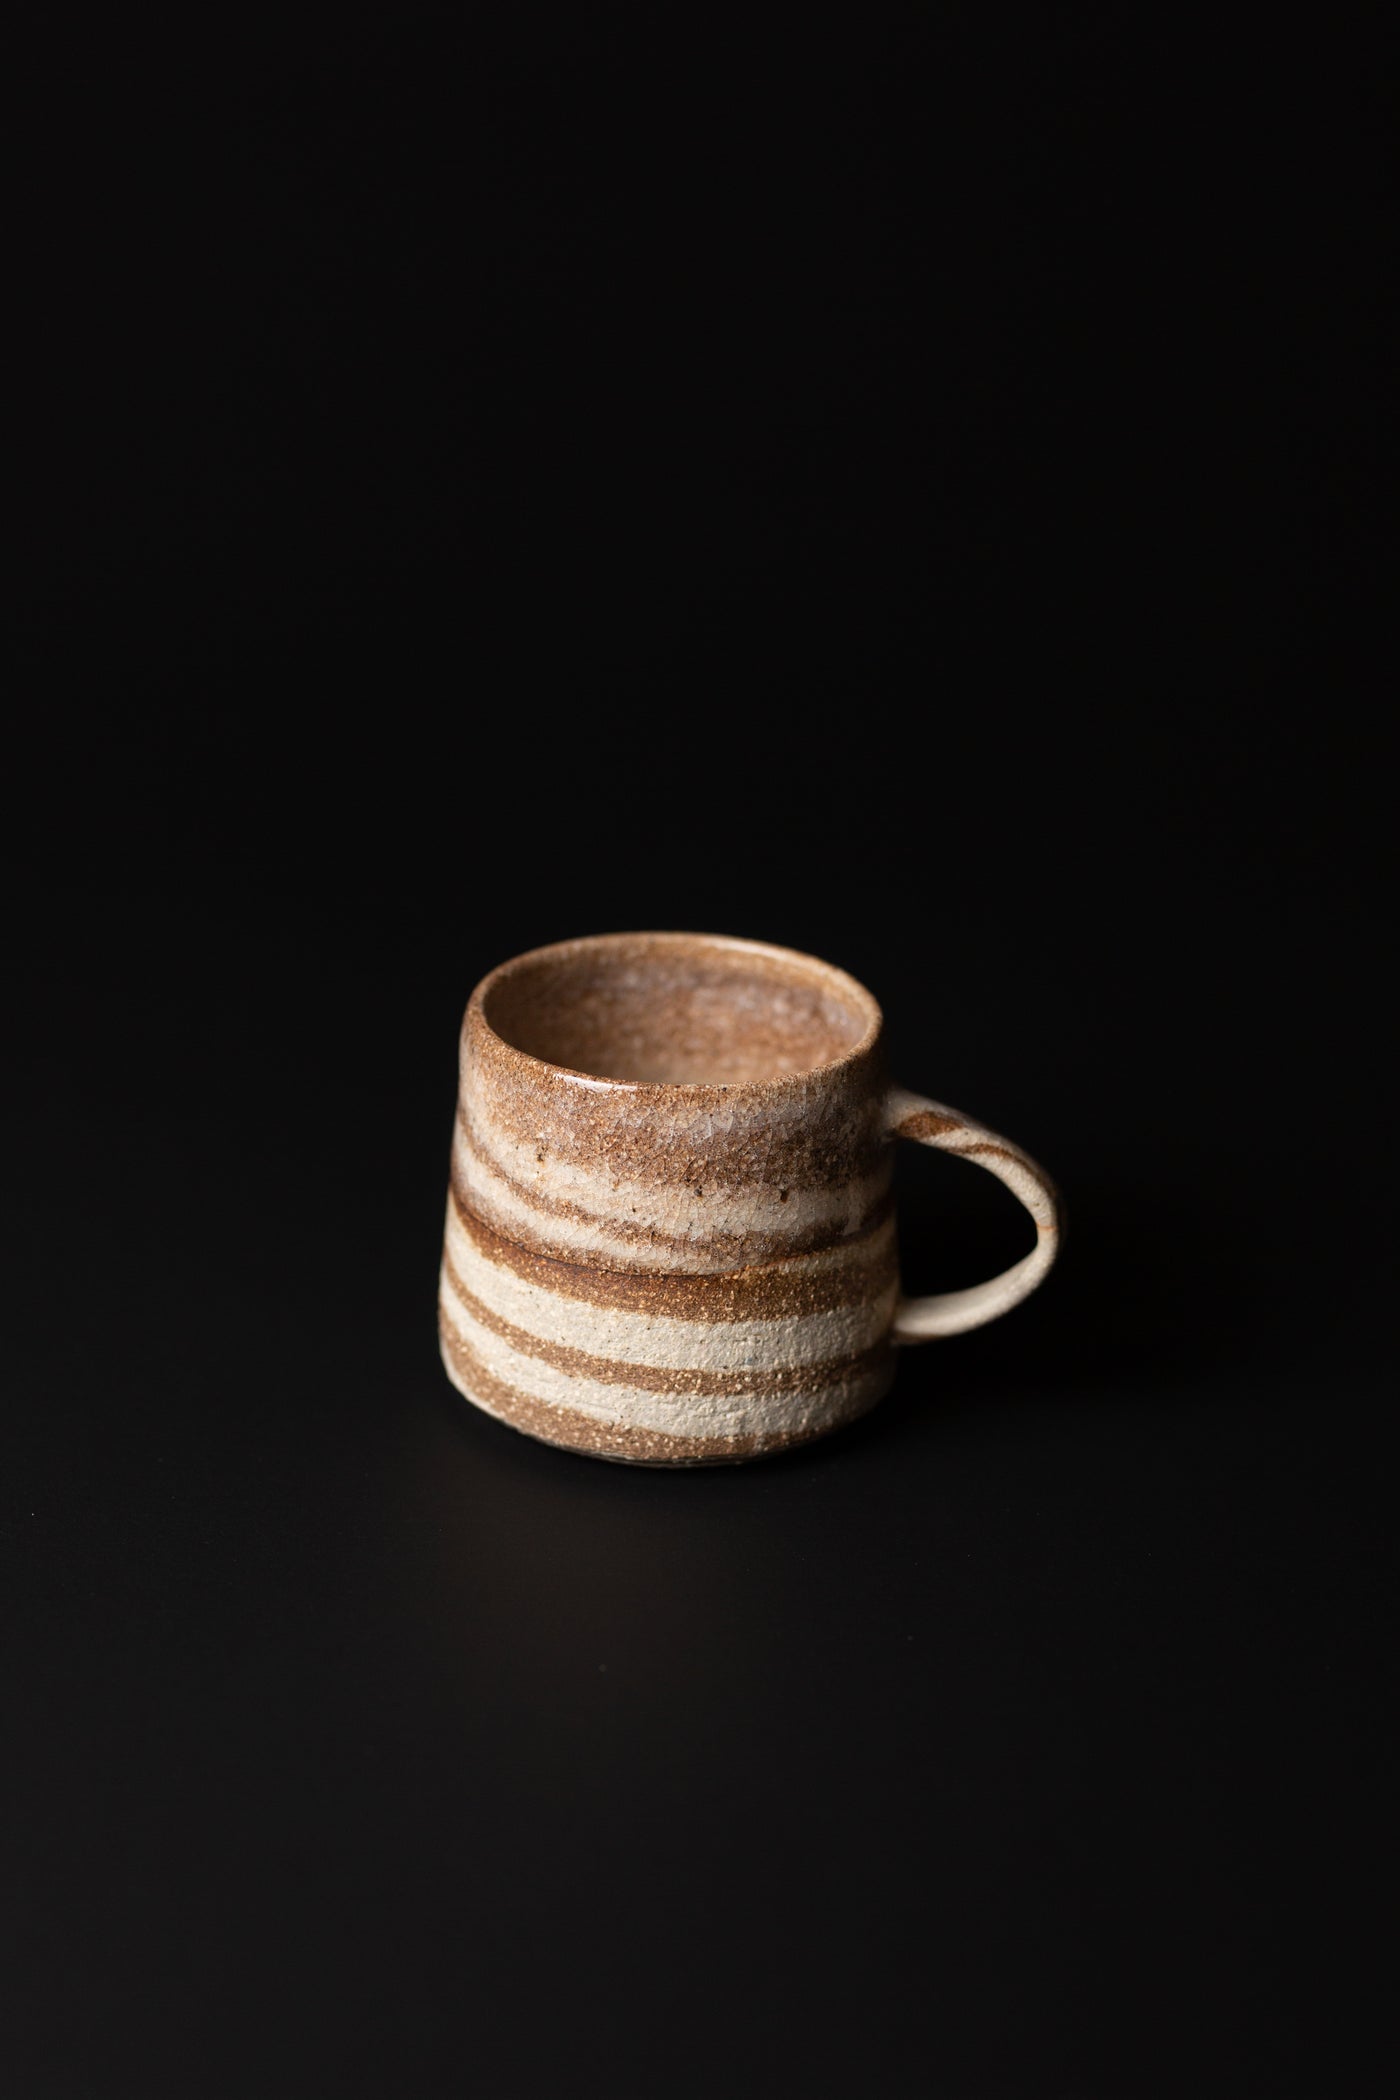 Handmade with traditional wheel-thrown techniques and fired at high temperatures for durability. This handcrafted mug is a natural, beautiful piece of Australian homeware. Type: Mug  Colour: White and Brown  Materials: Mixed Clay - Stoneware  Dimensions: 120 x 80mm     240mls